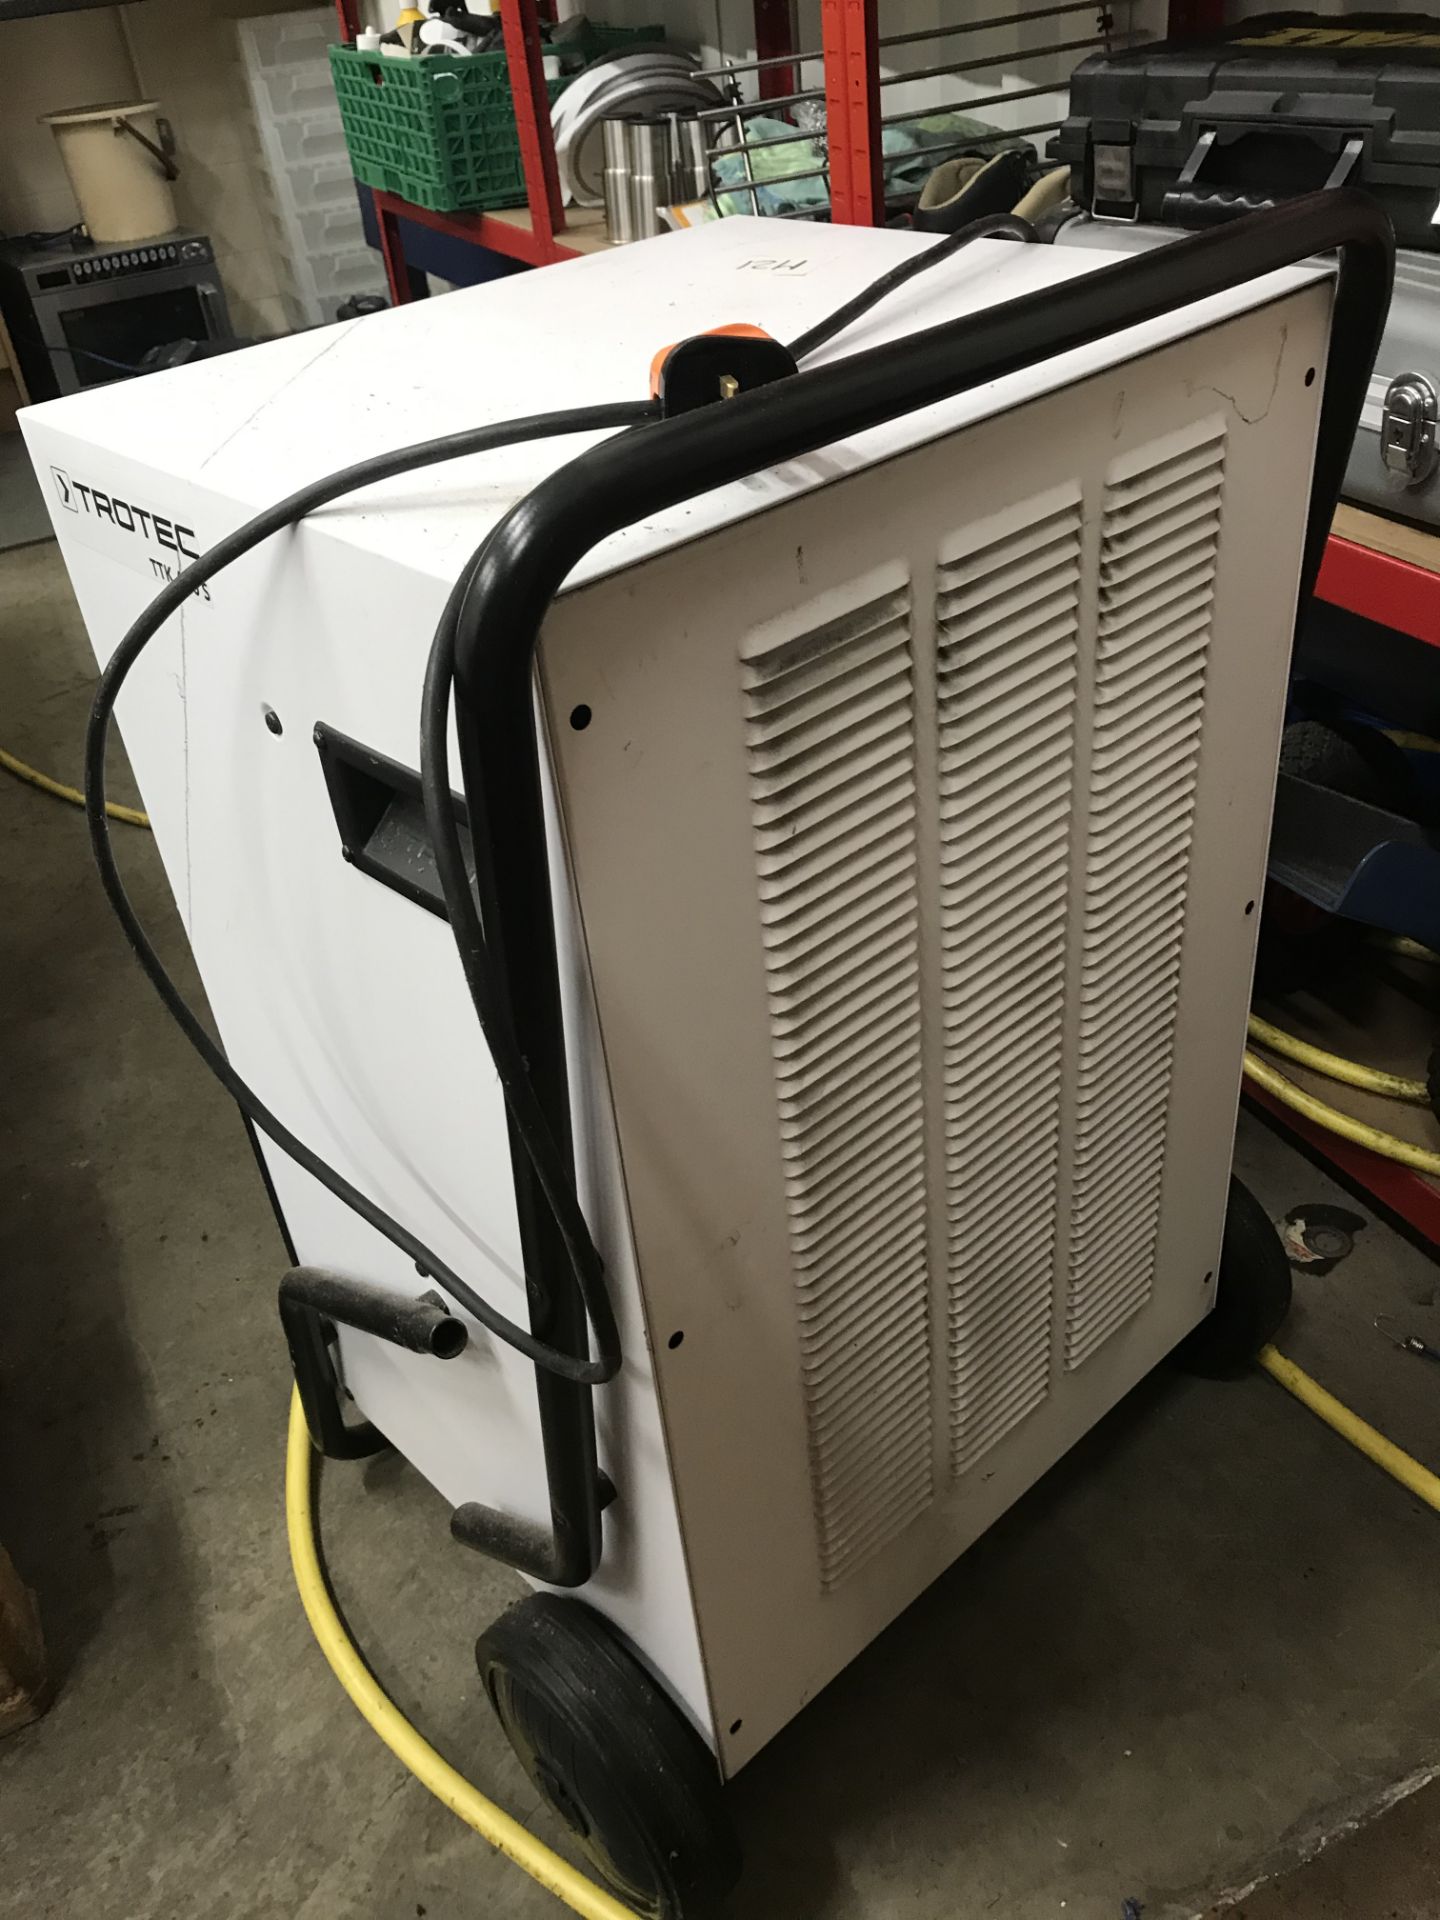 Trotec TTK650S Commercial Dehumidifier - Image 4 of 4